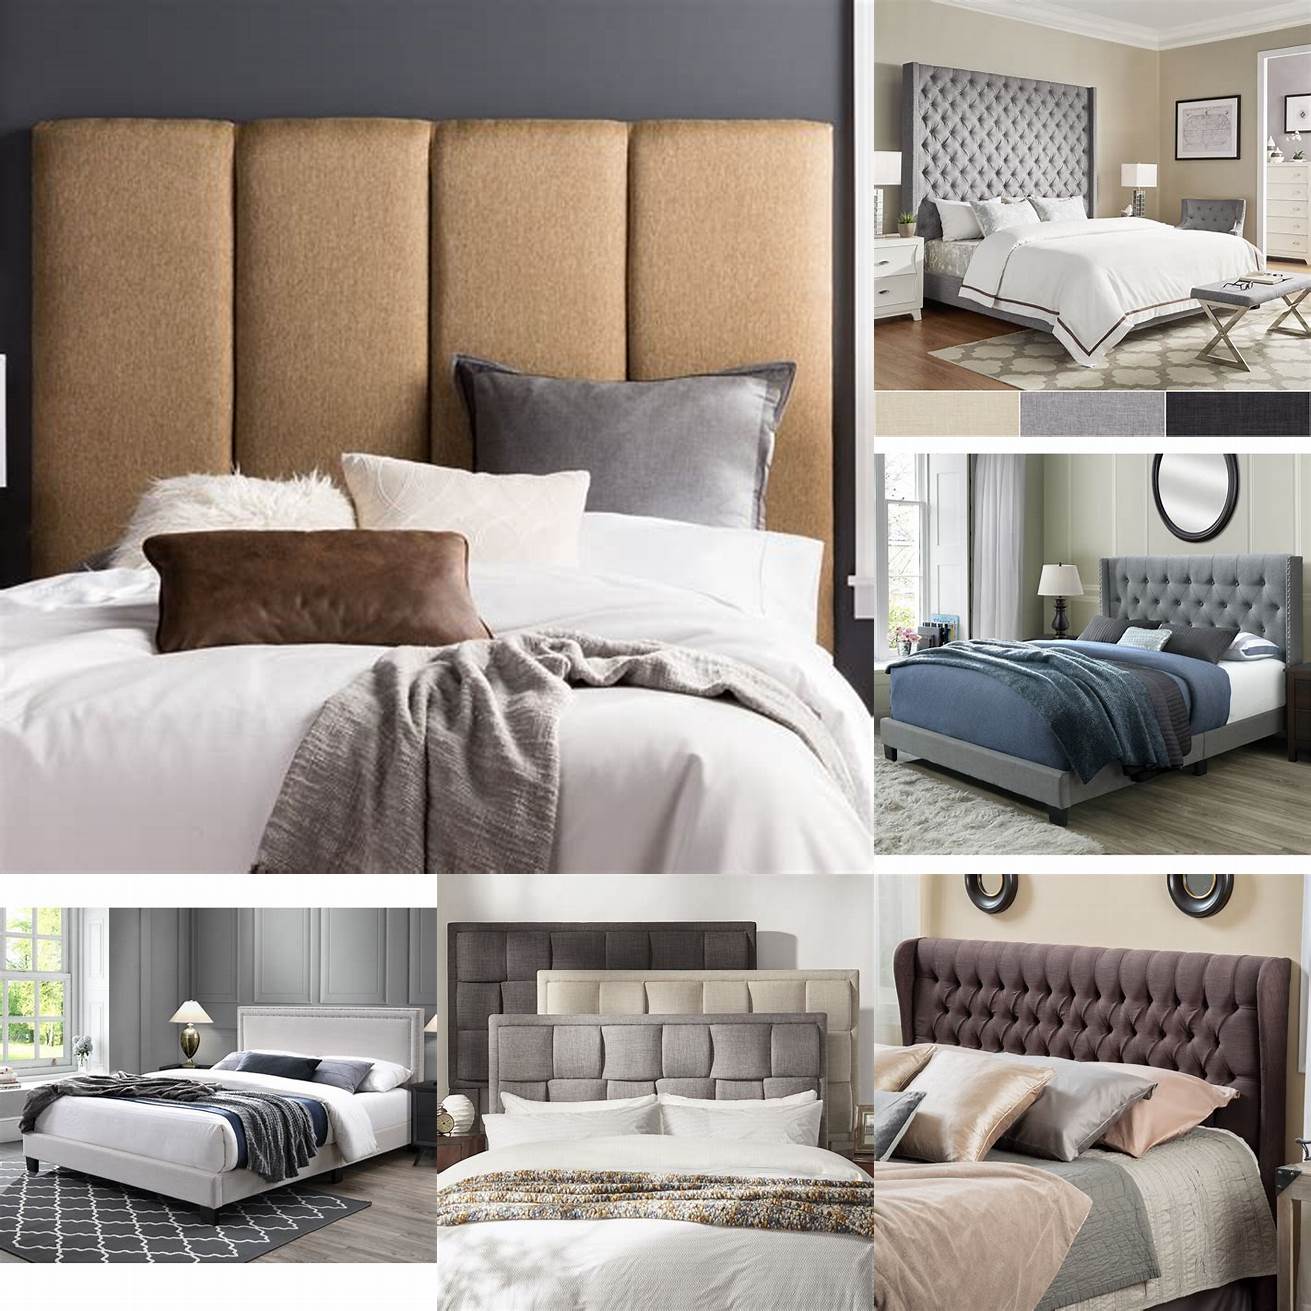 Comfort - The cushioned headboards and footboards on upholstered beds provide a comfortable place to rest your head and feet